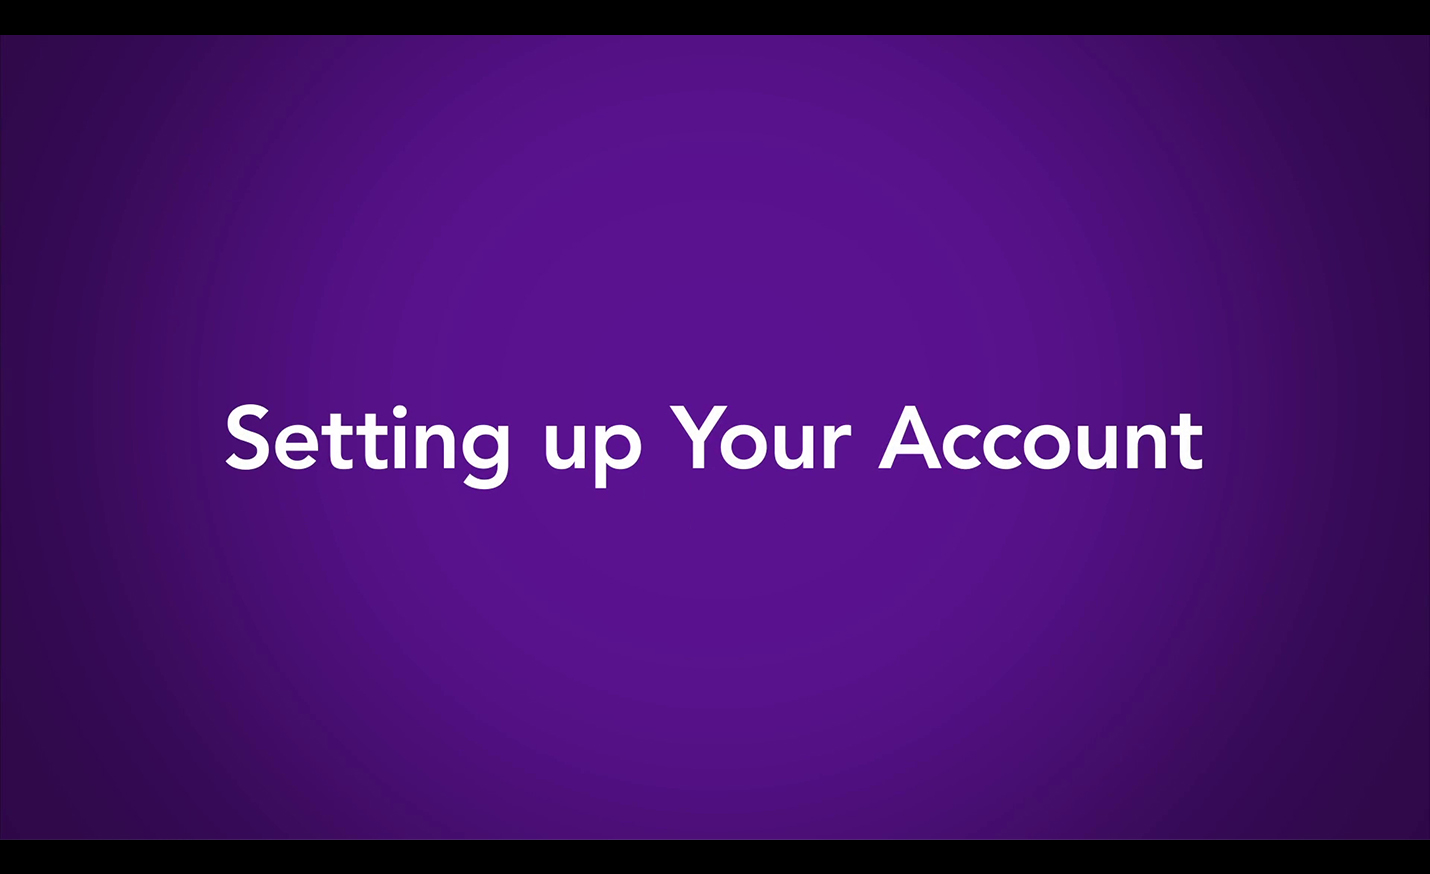 How to set up your account